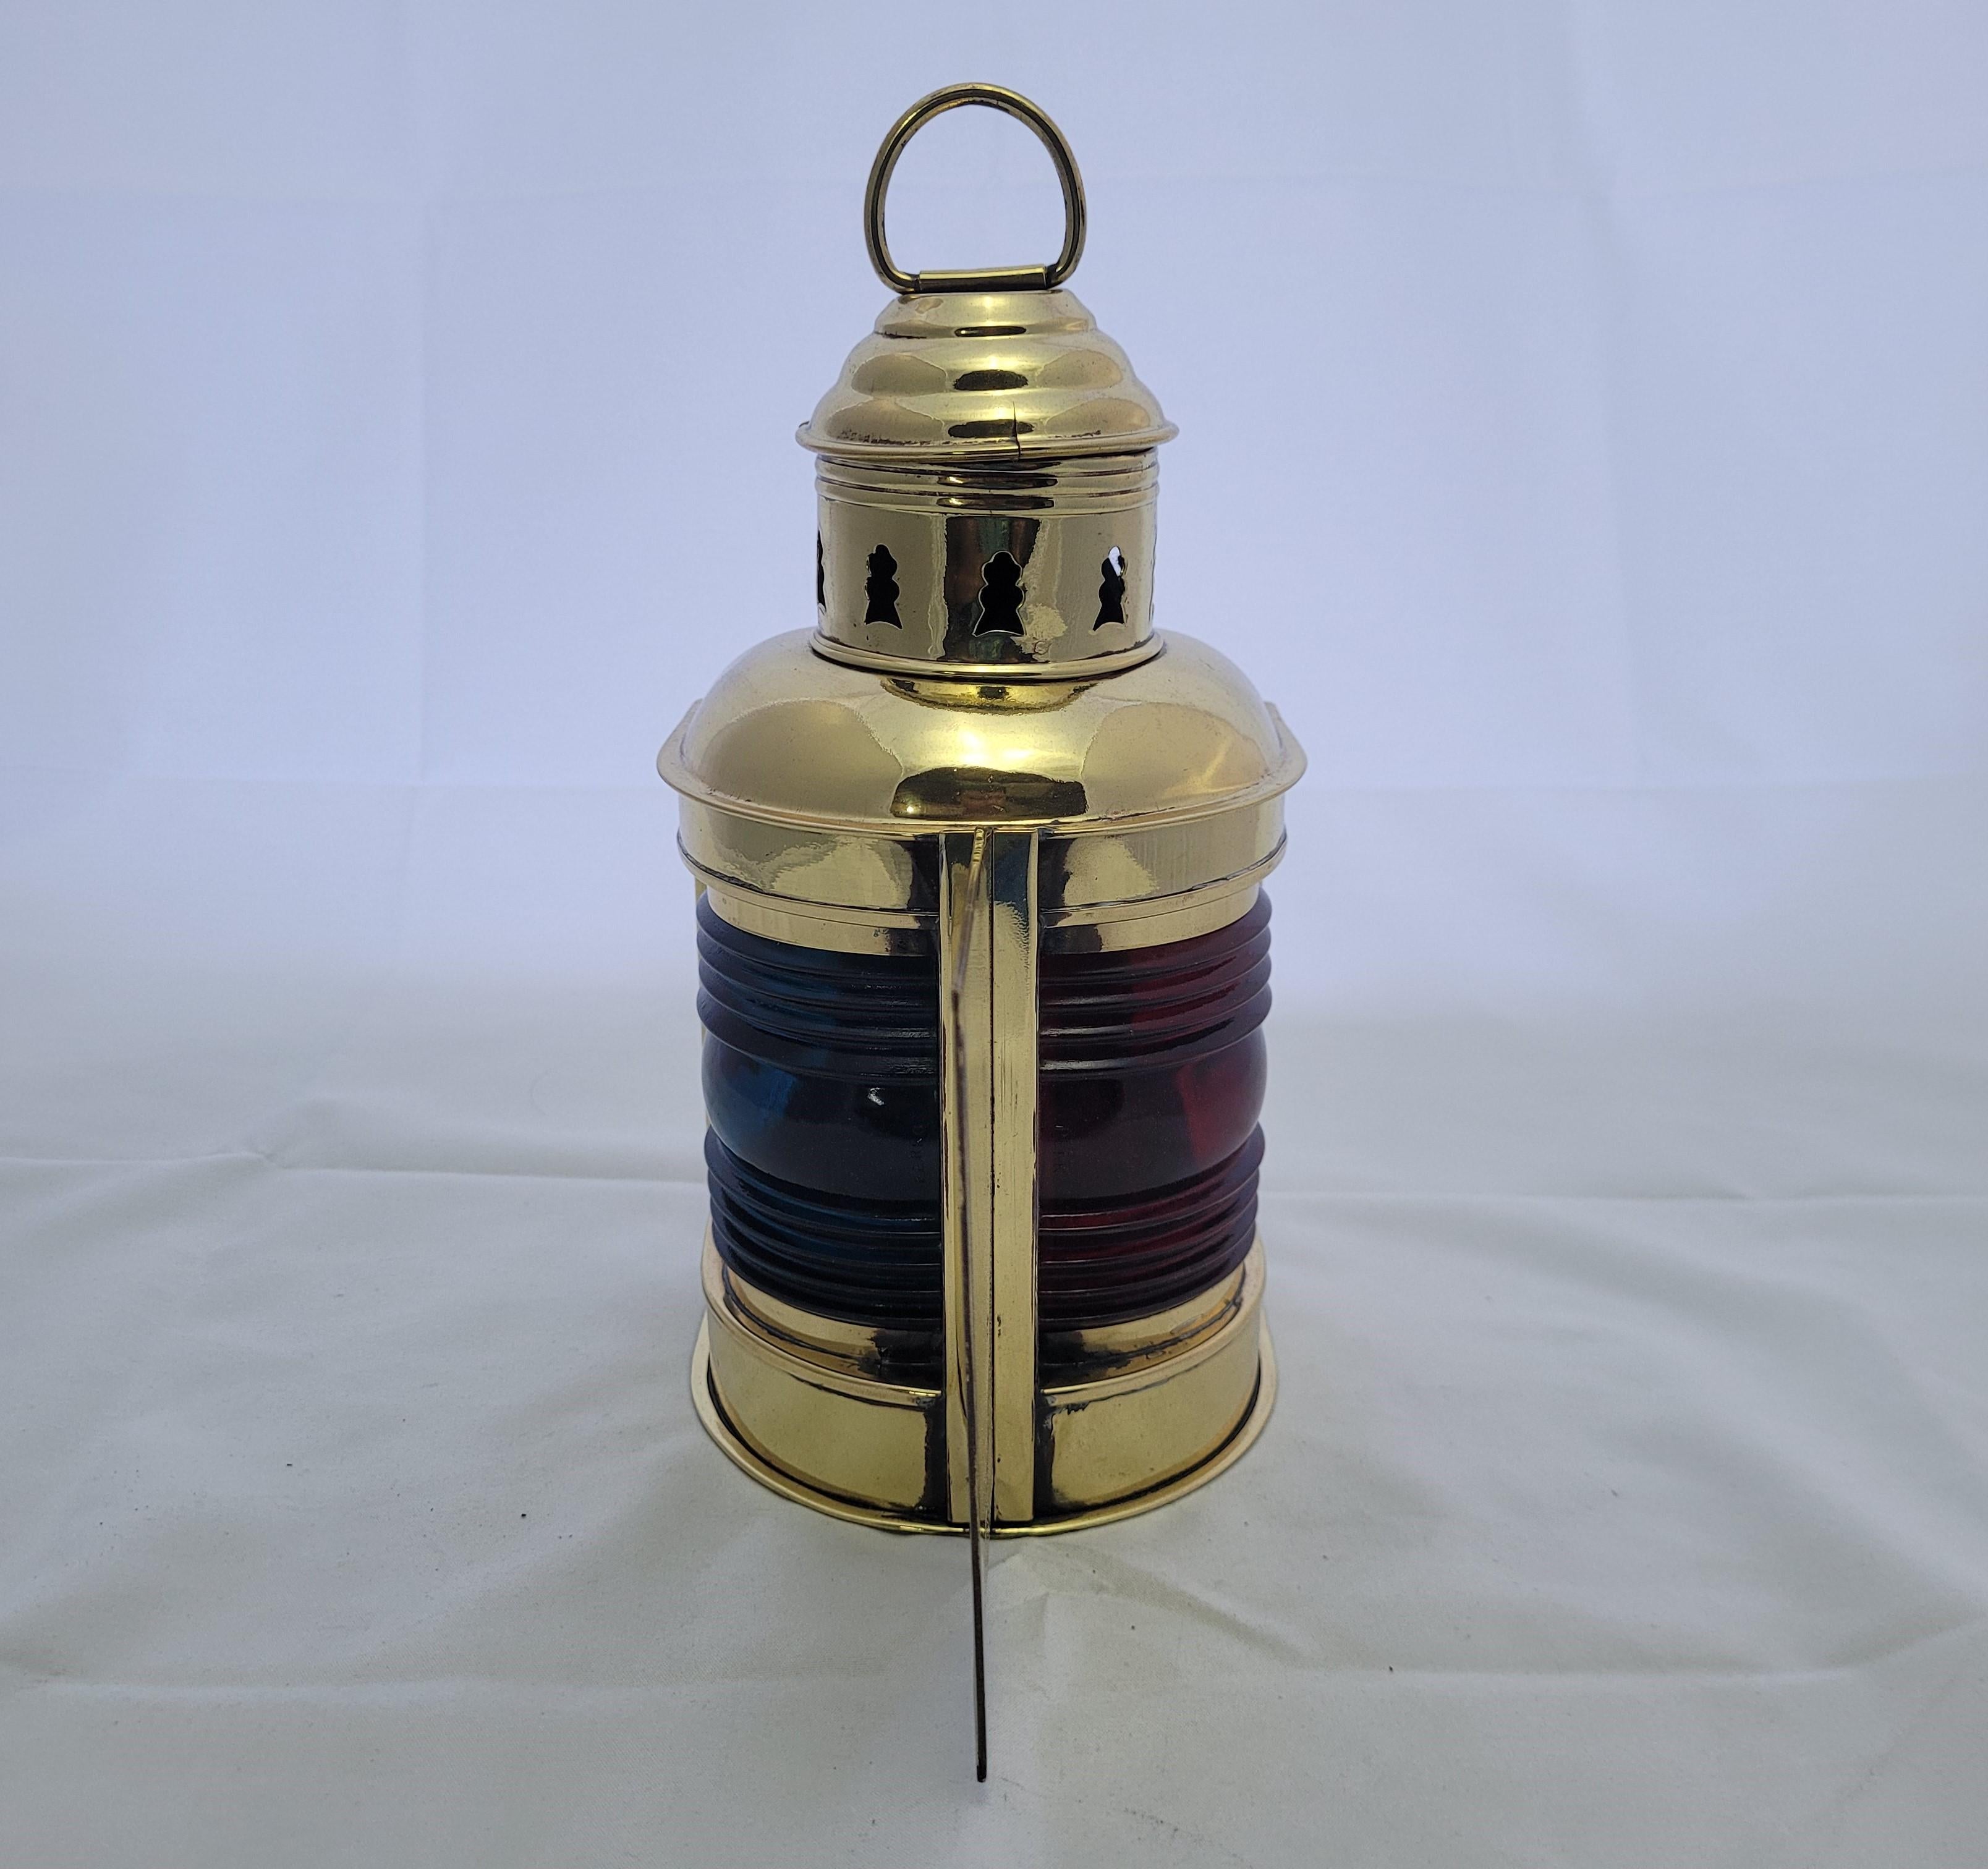 Bow lantern from a yacht by Perkins Marine Lamp Corporation of Brooklyn New York. Fitted with original burner. Meticulously polished and lacquered. Vented top and carry ring.

Weight: 2 lbs.
Overall Dimensions: 9